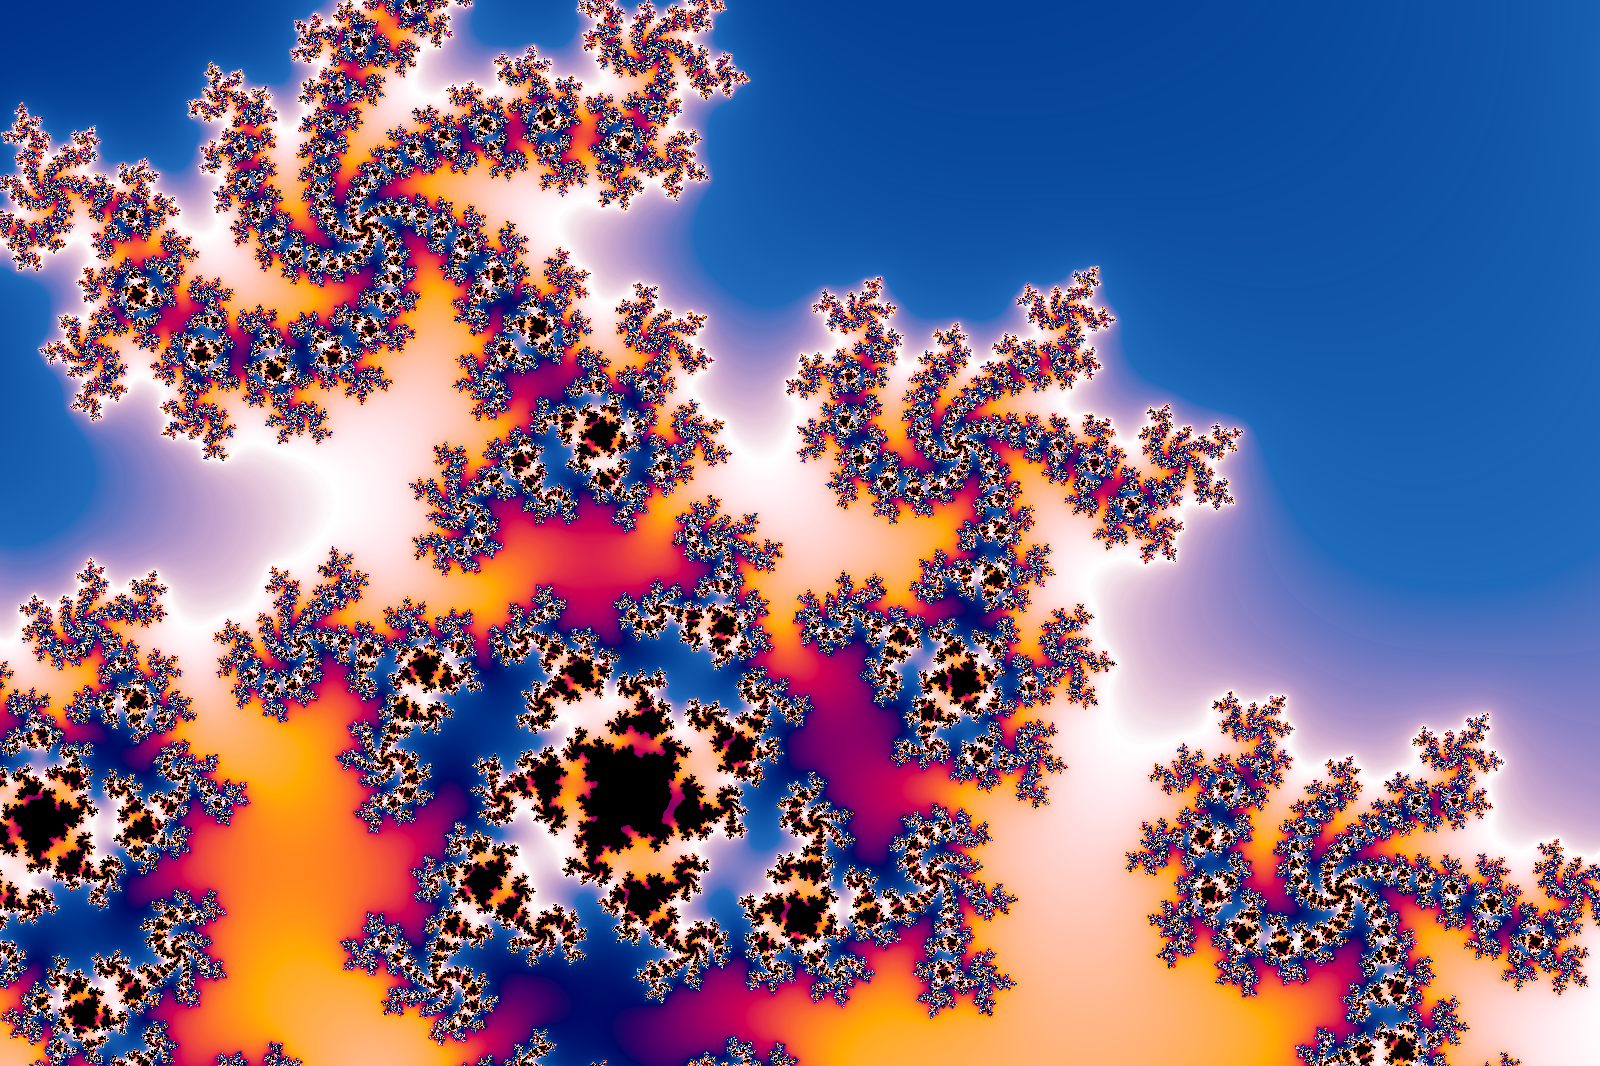 example fractal image 1